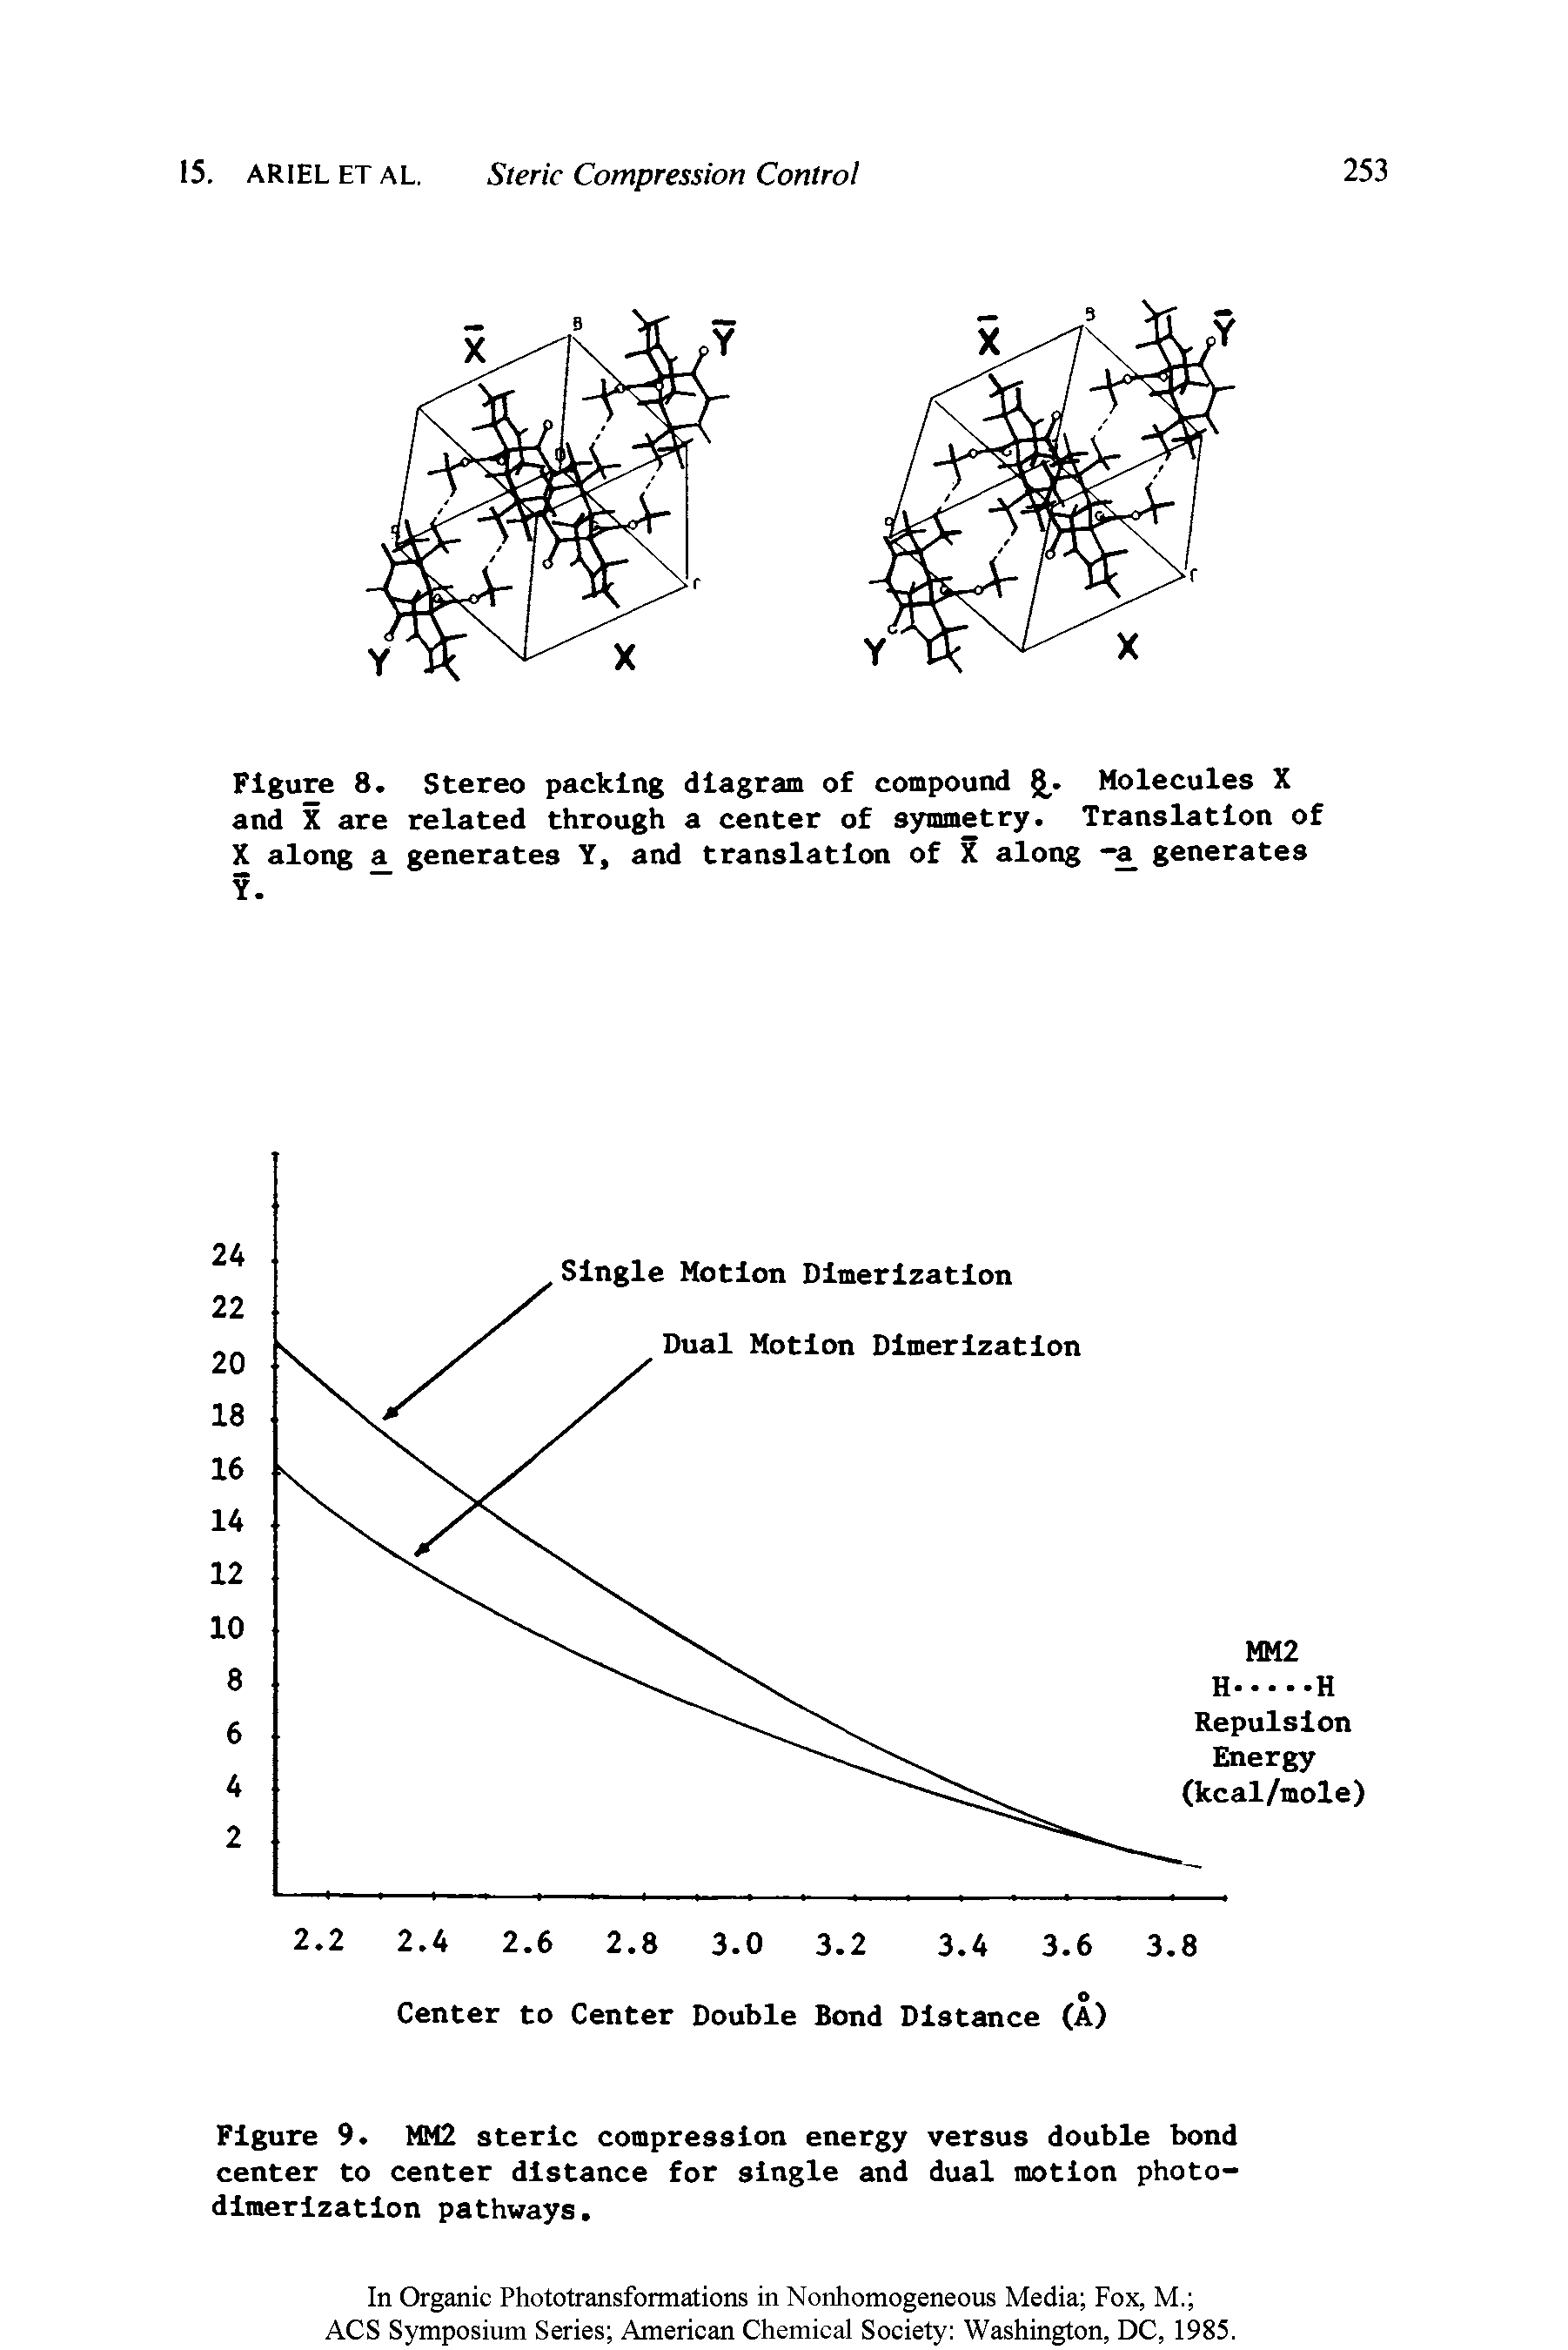 Figure 9. MM2 steric compression energy versus double bond center to center distance for single and dual motion photodimerization pathways.